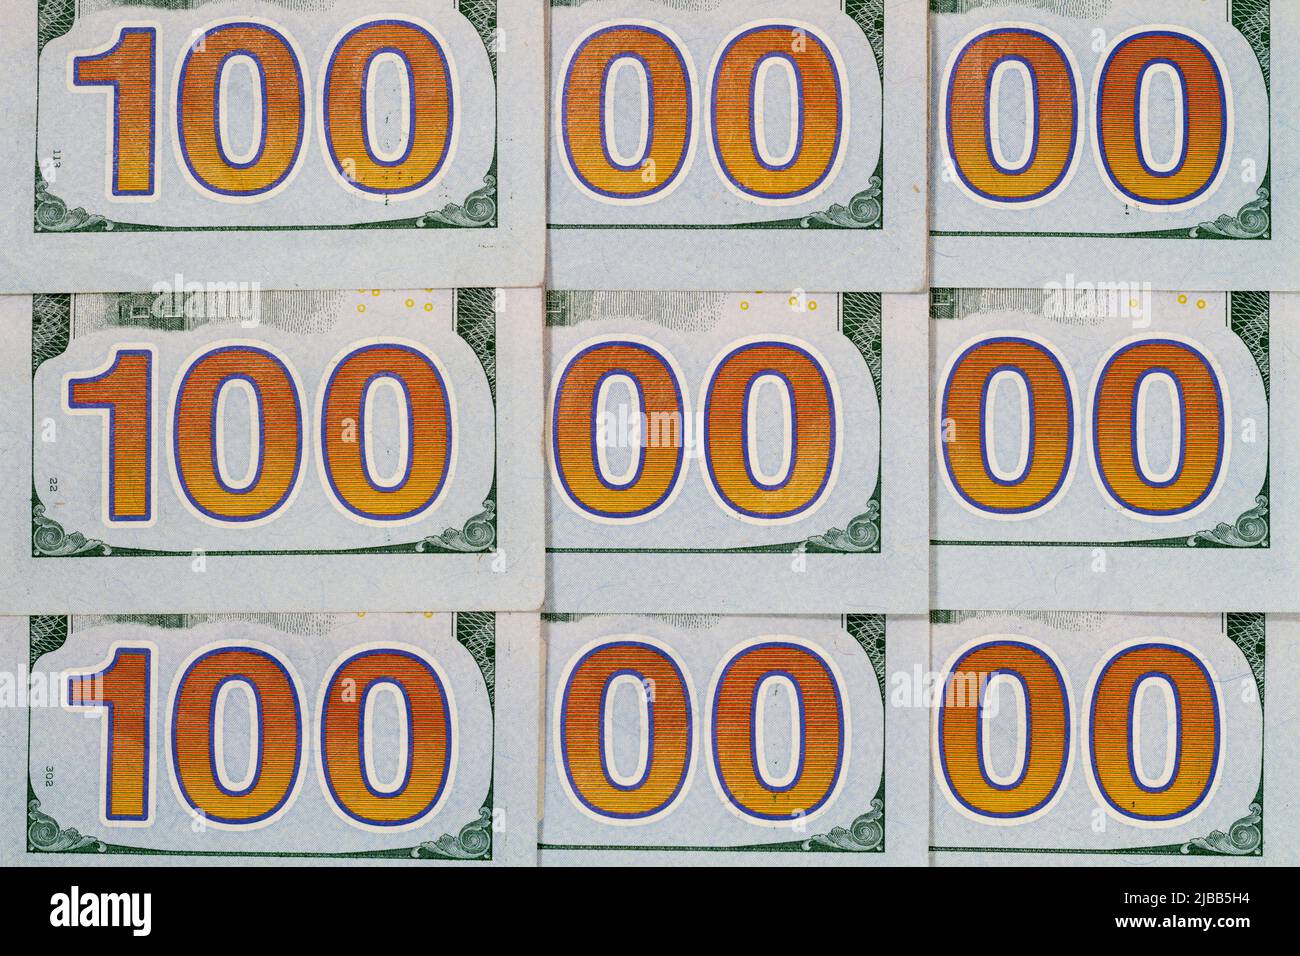 A studio shot concept of an arrangment of the reverse of some United State of America one hundred dollar bills used to spell out one million dollars. Stock Photo